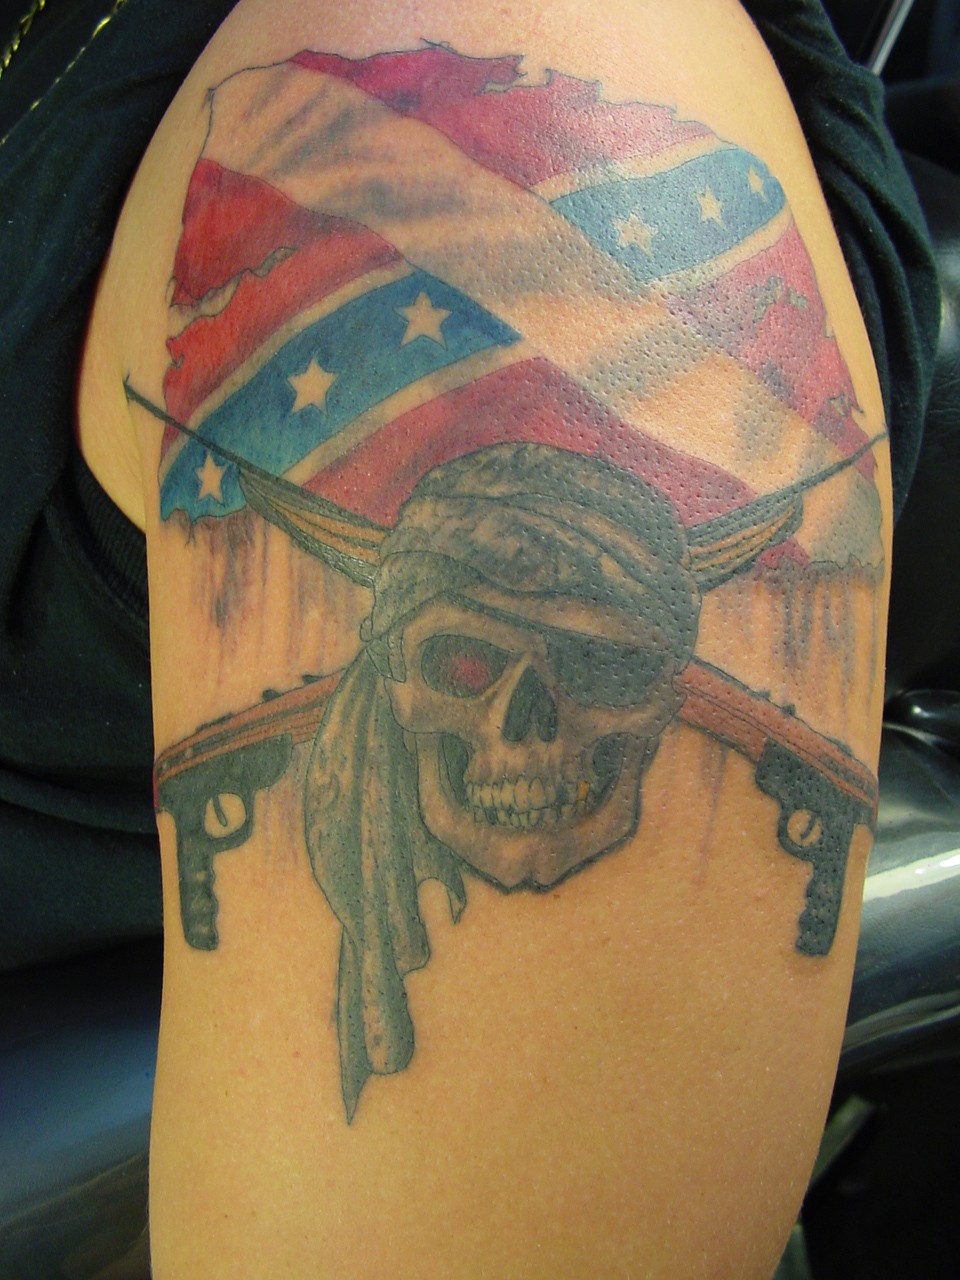 Rebel Flag Tattoos Designs, Ideas and Meaning | Tattoos For You